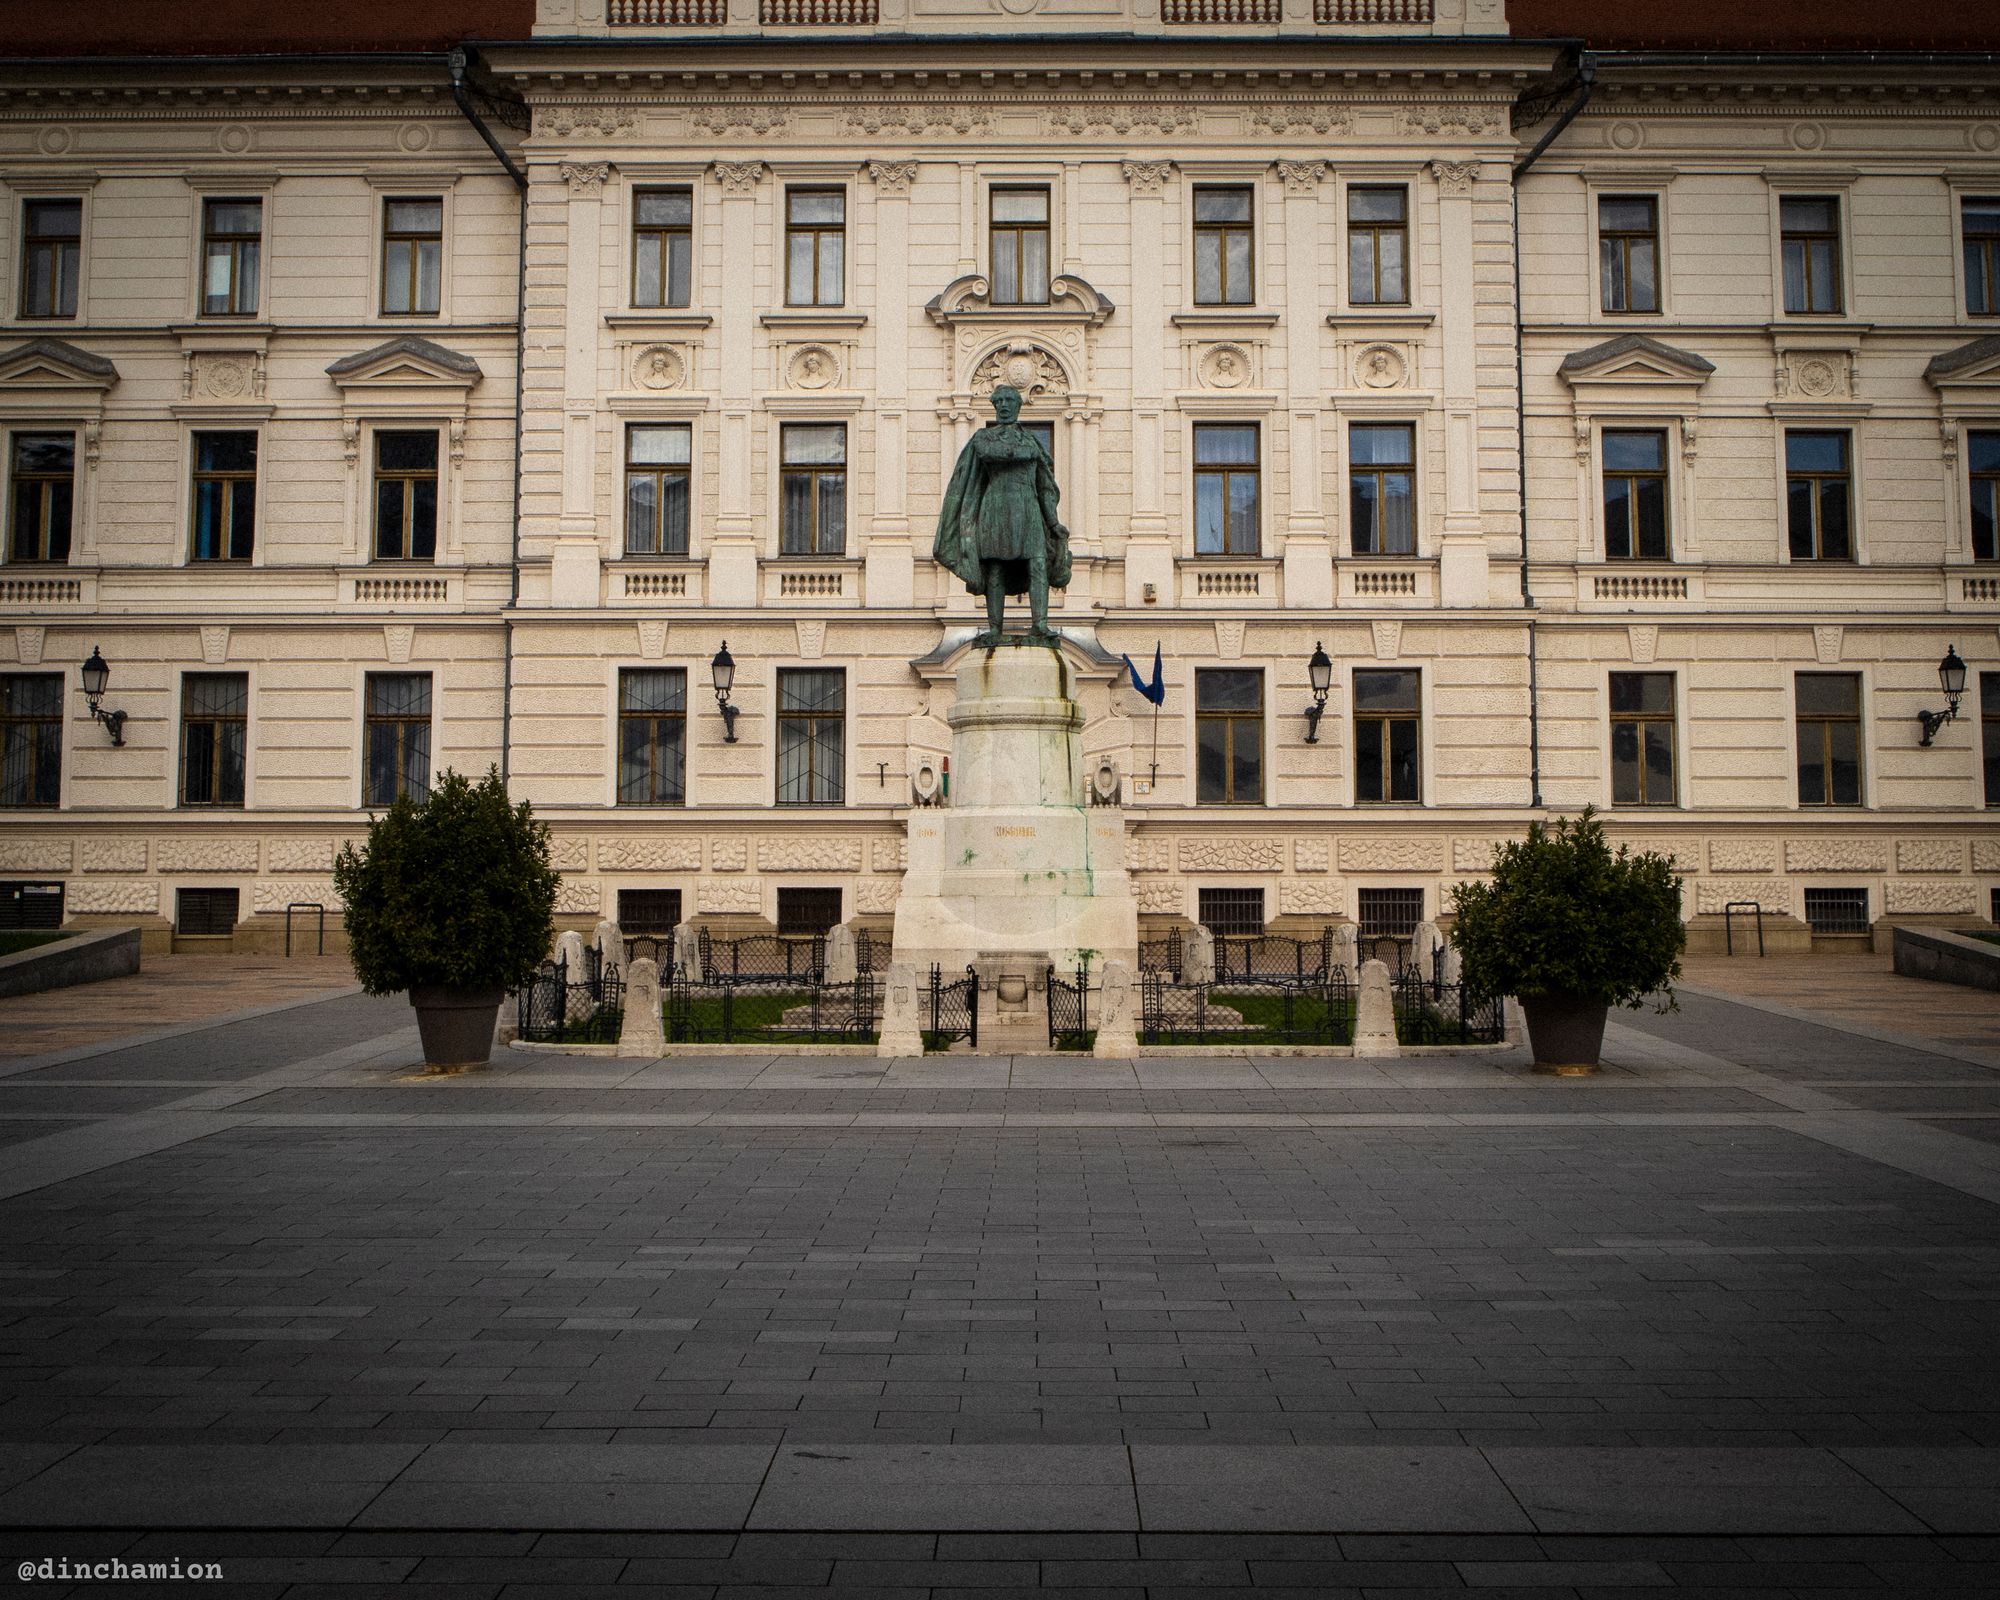 The statue of Lajos Kossuth in the middle of the square named after him in Pécs, Hungary.